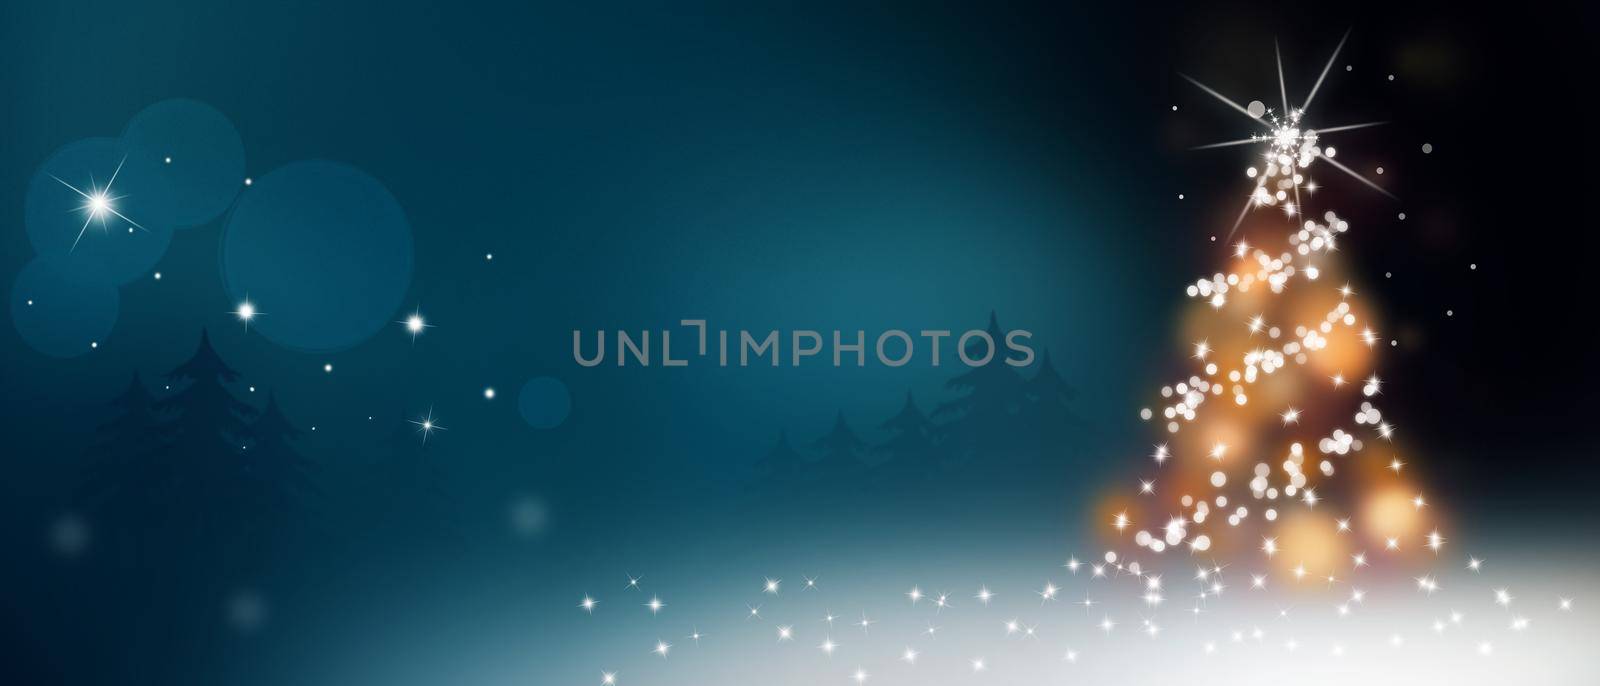 Winter background design concept with christmans tree by Taut